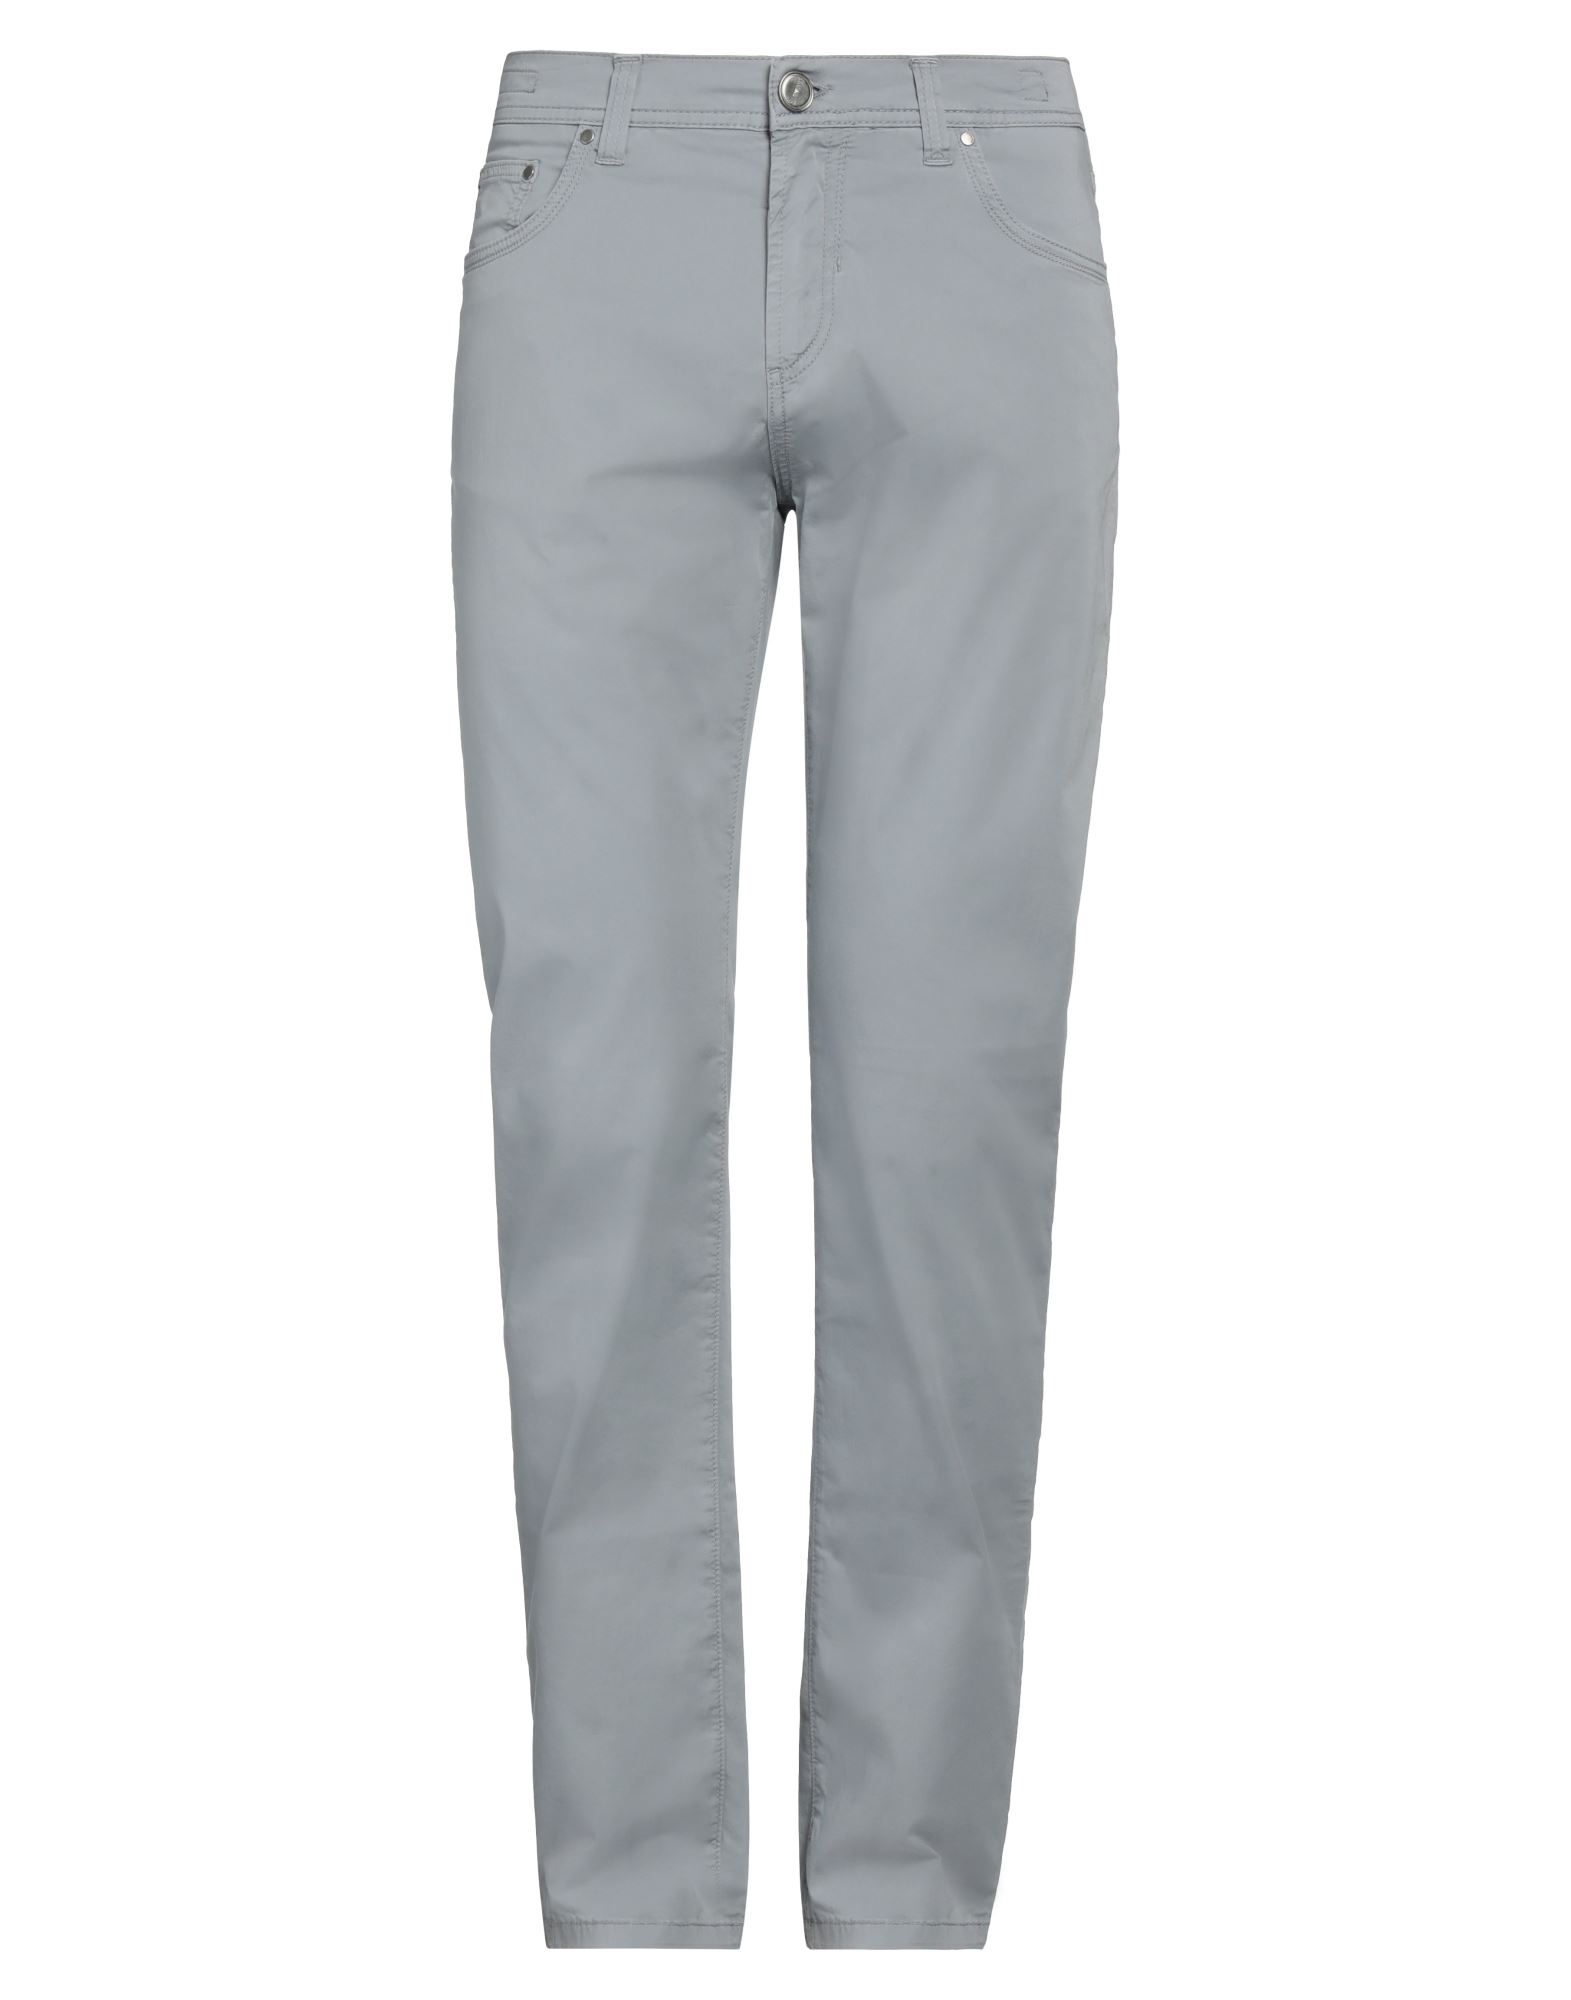 Nicwave Pants In Gray